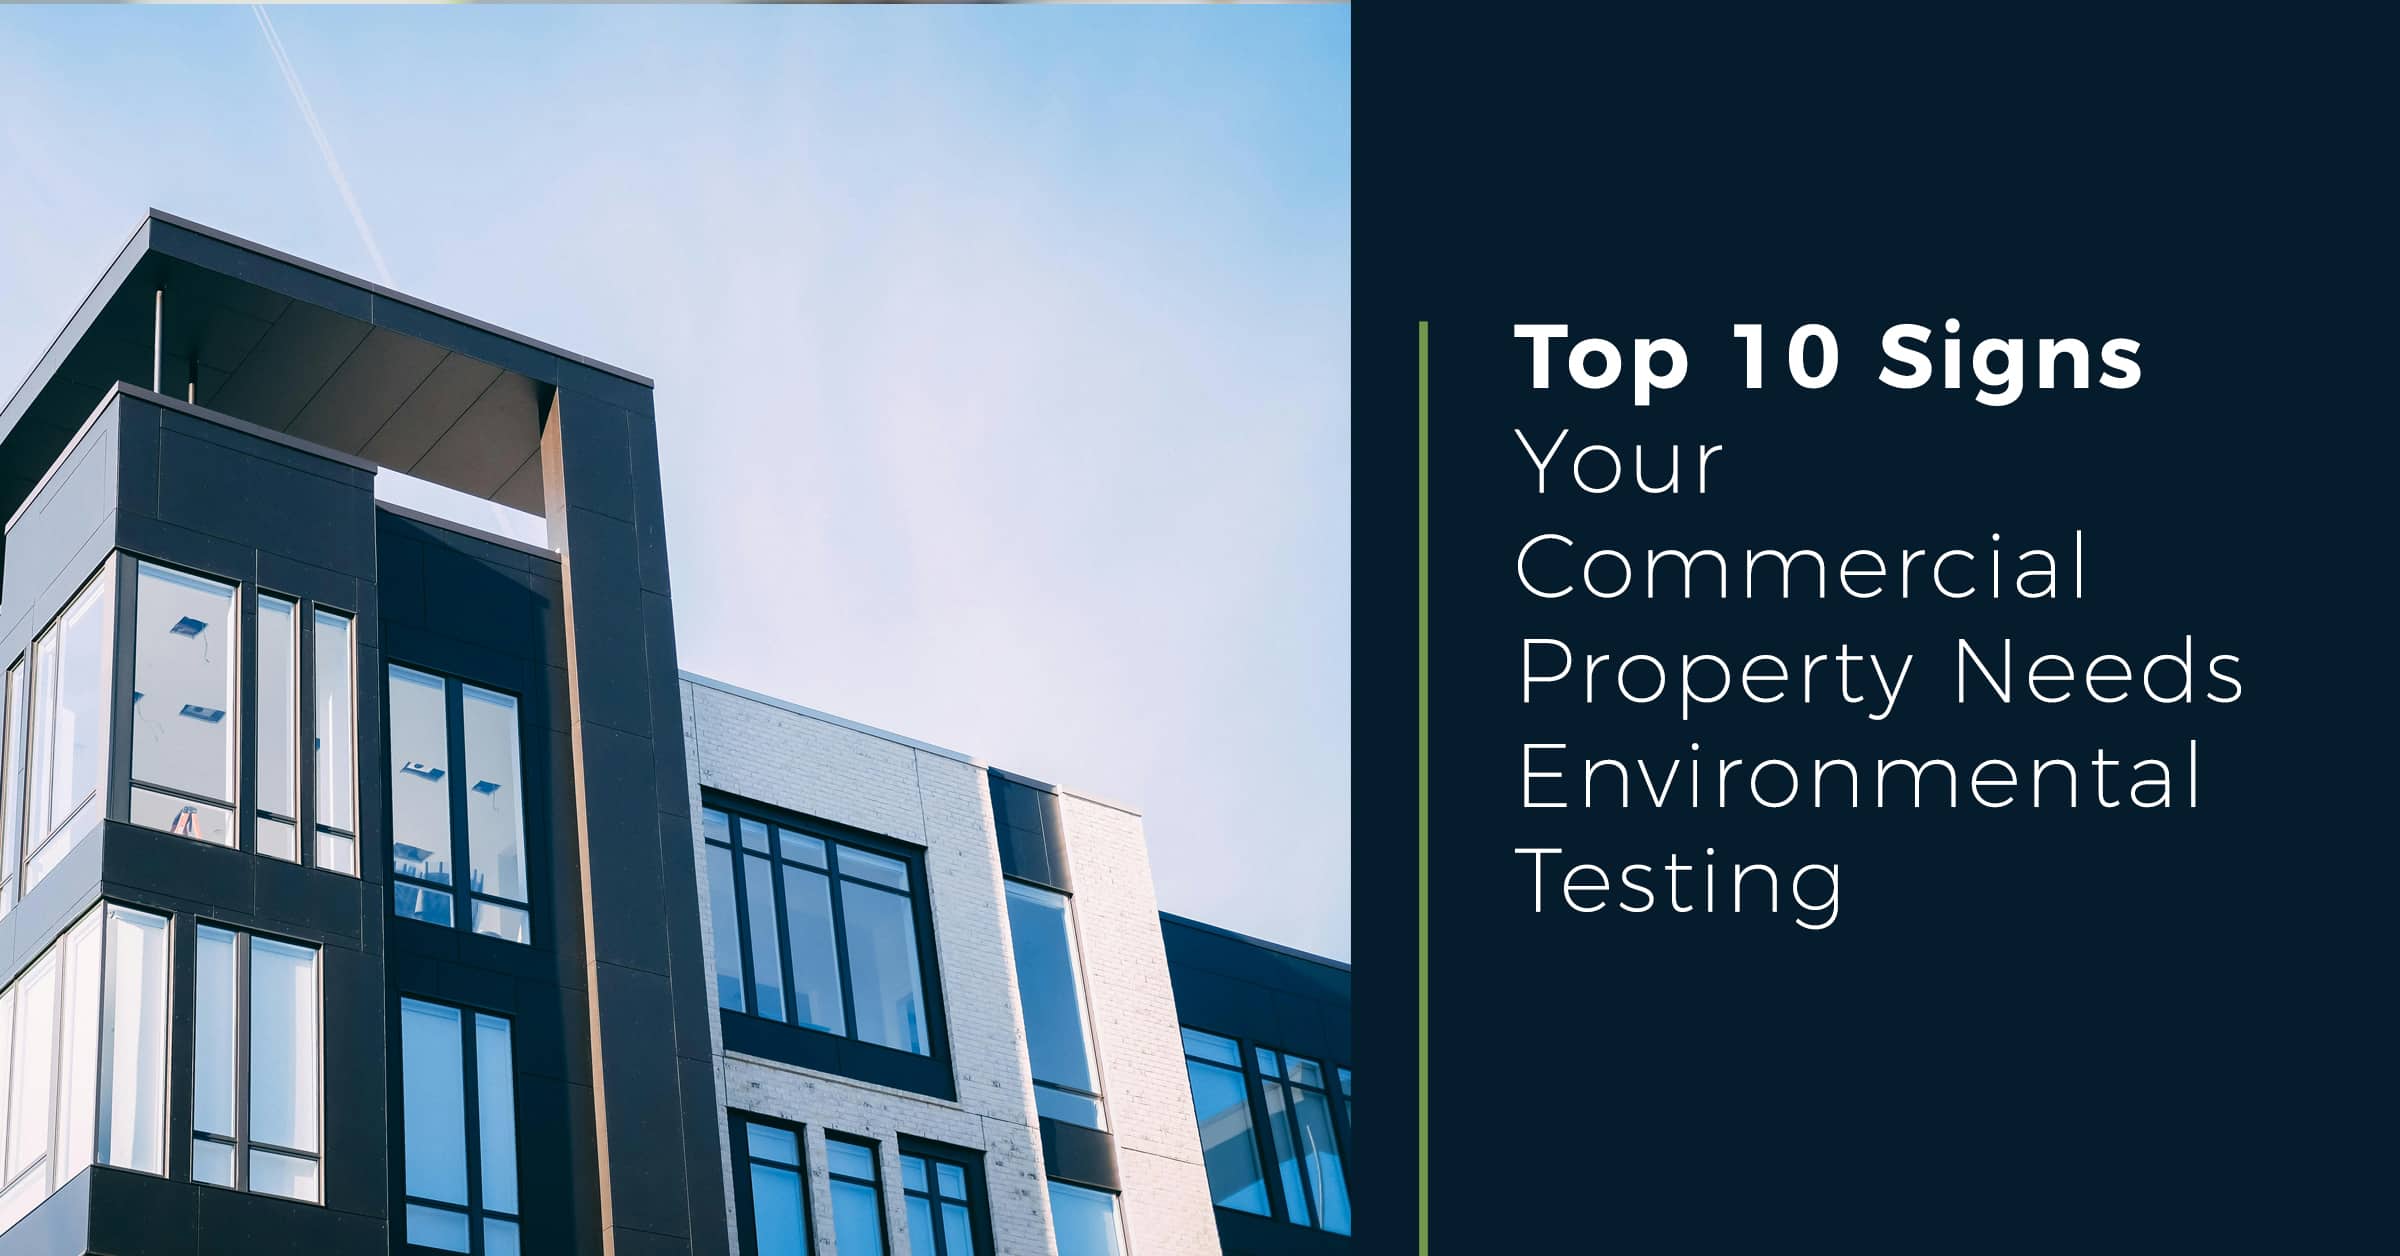 Commercial building and headline: Top 10 Signs Your Commercial Building Needs Environmental Testing